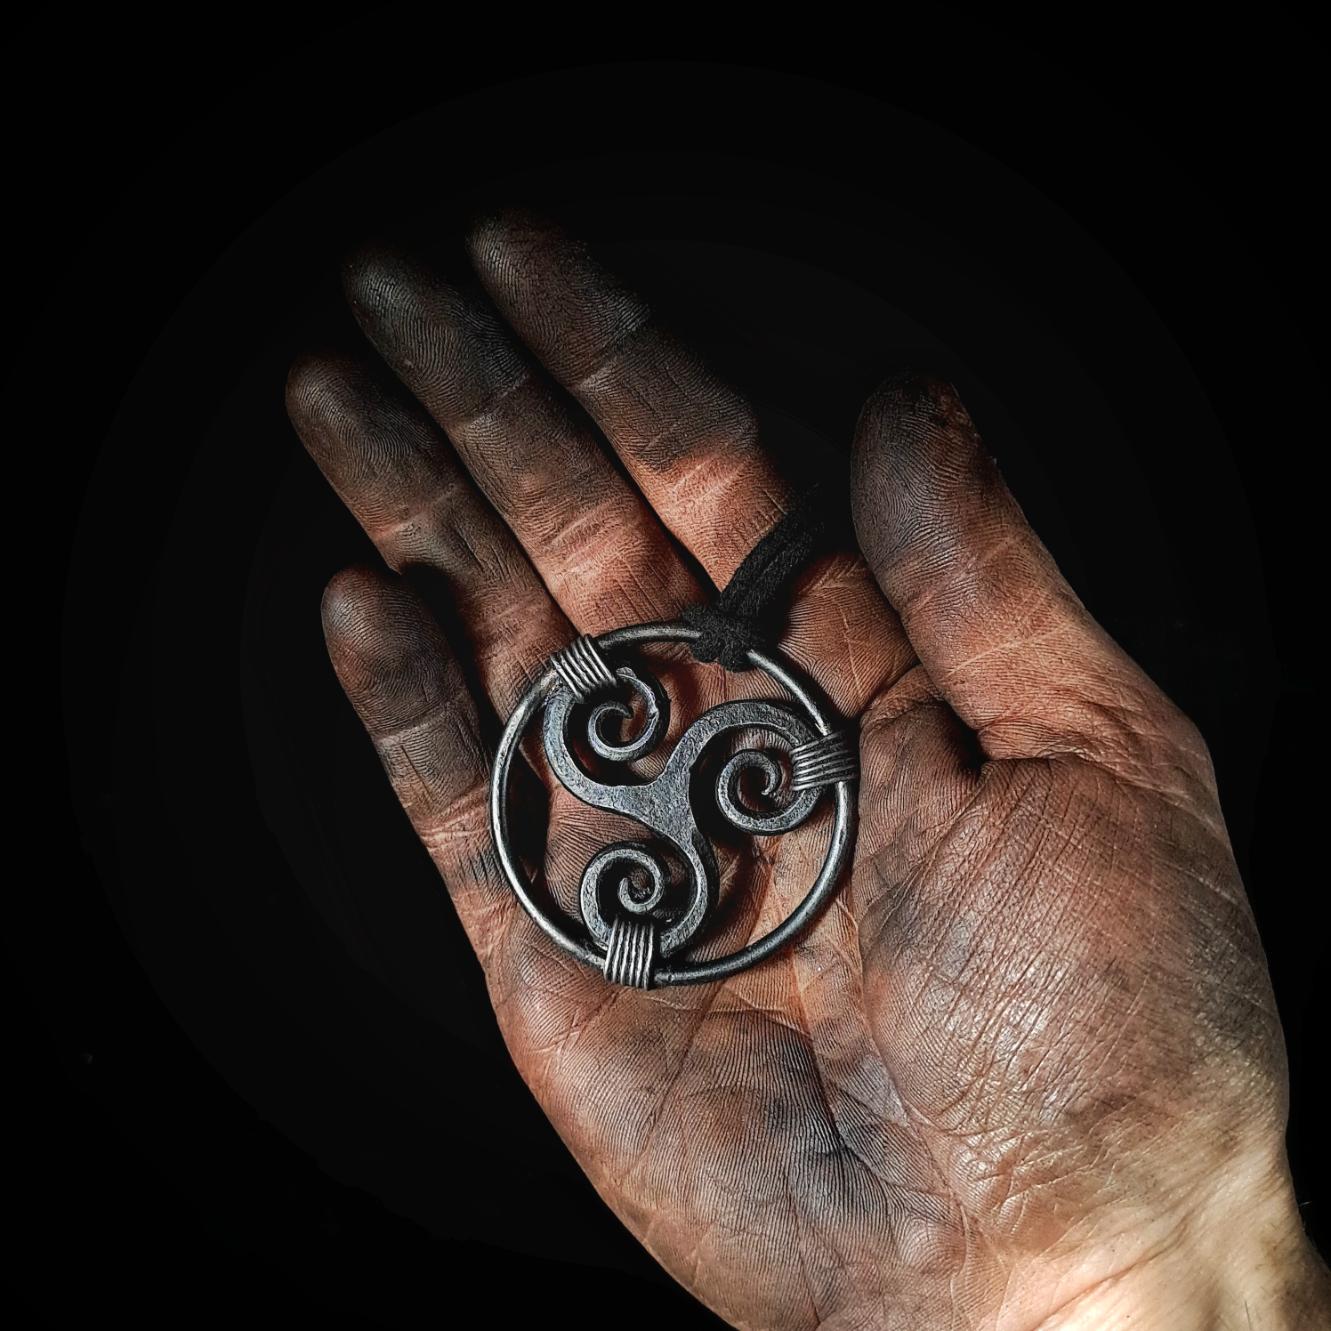 holding a triskele pendant in hands